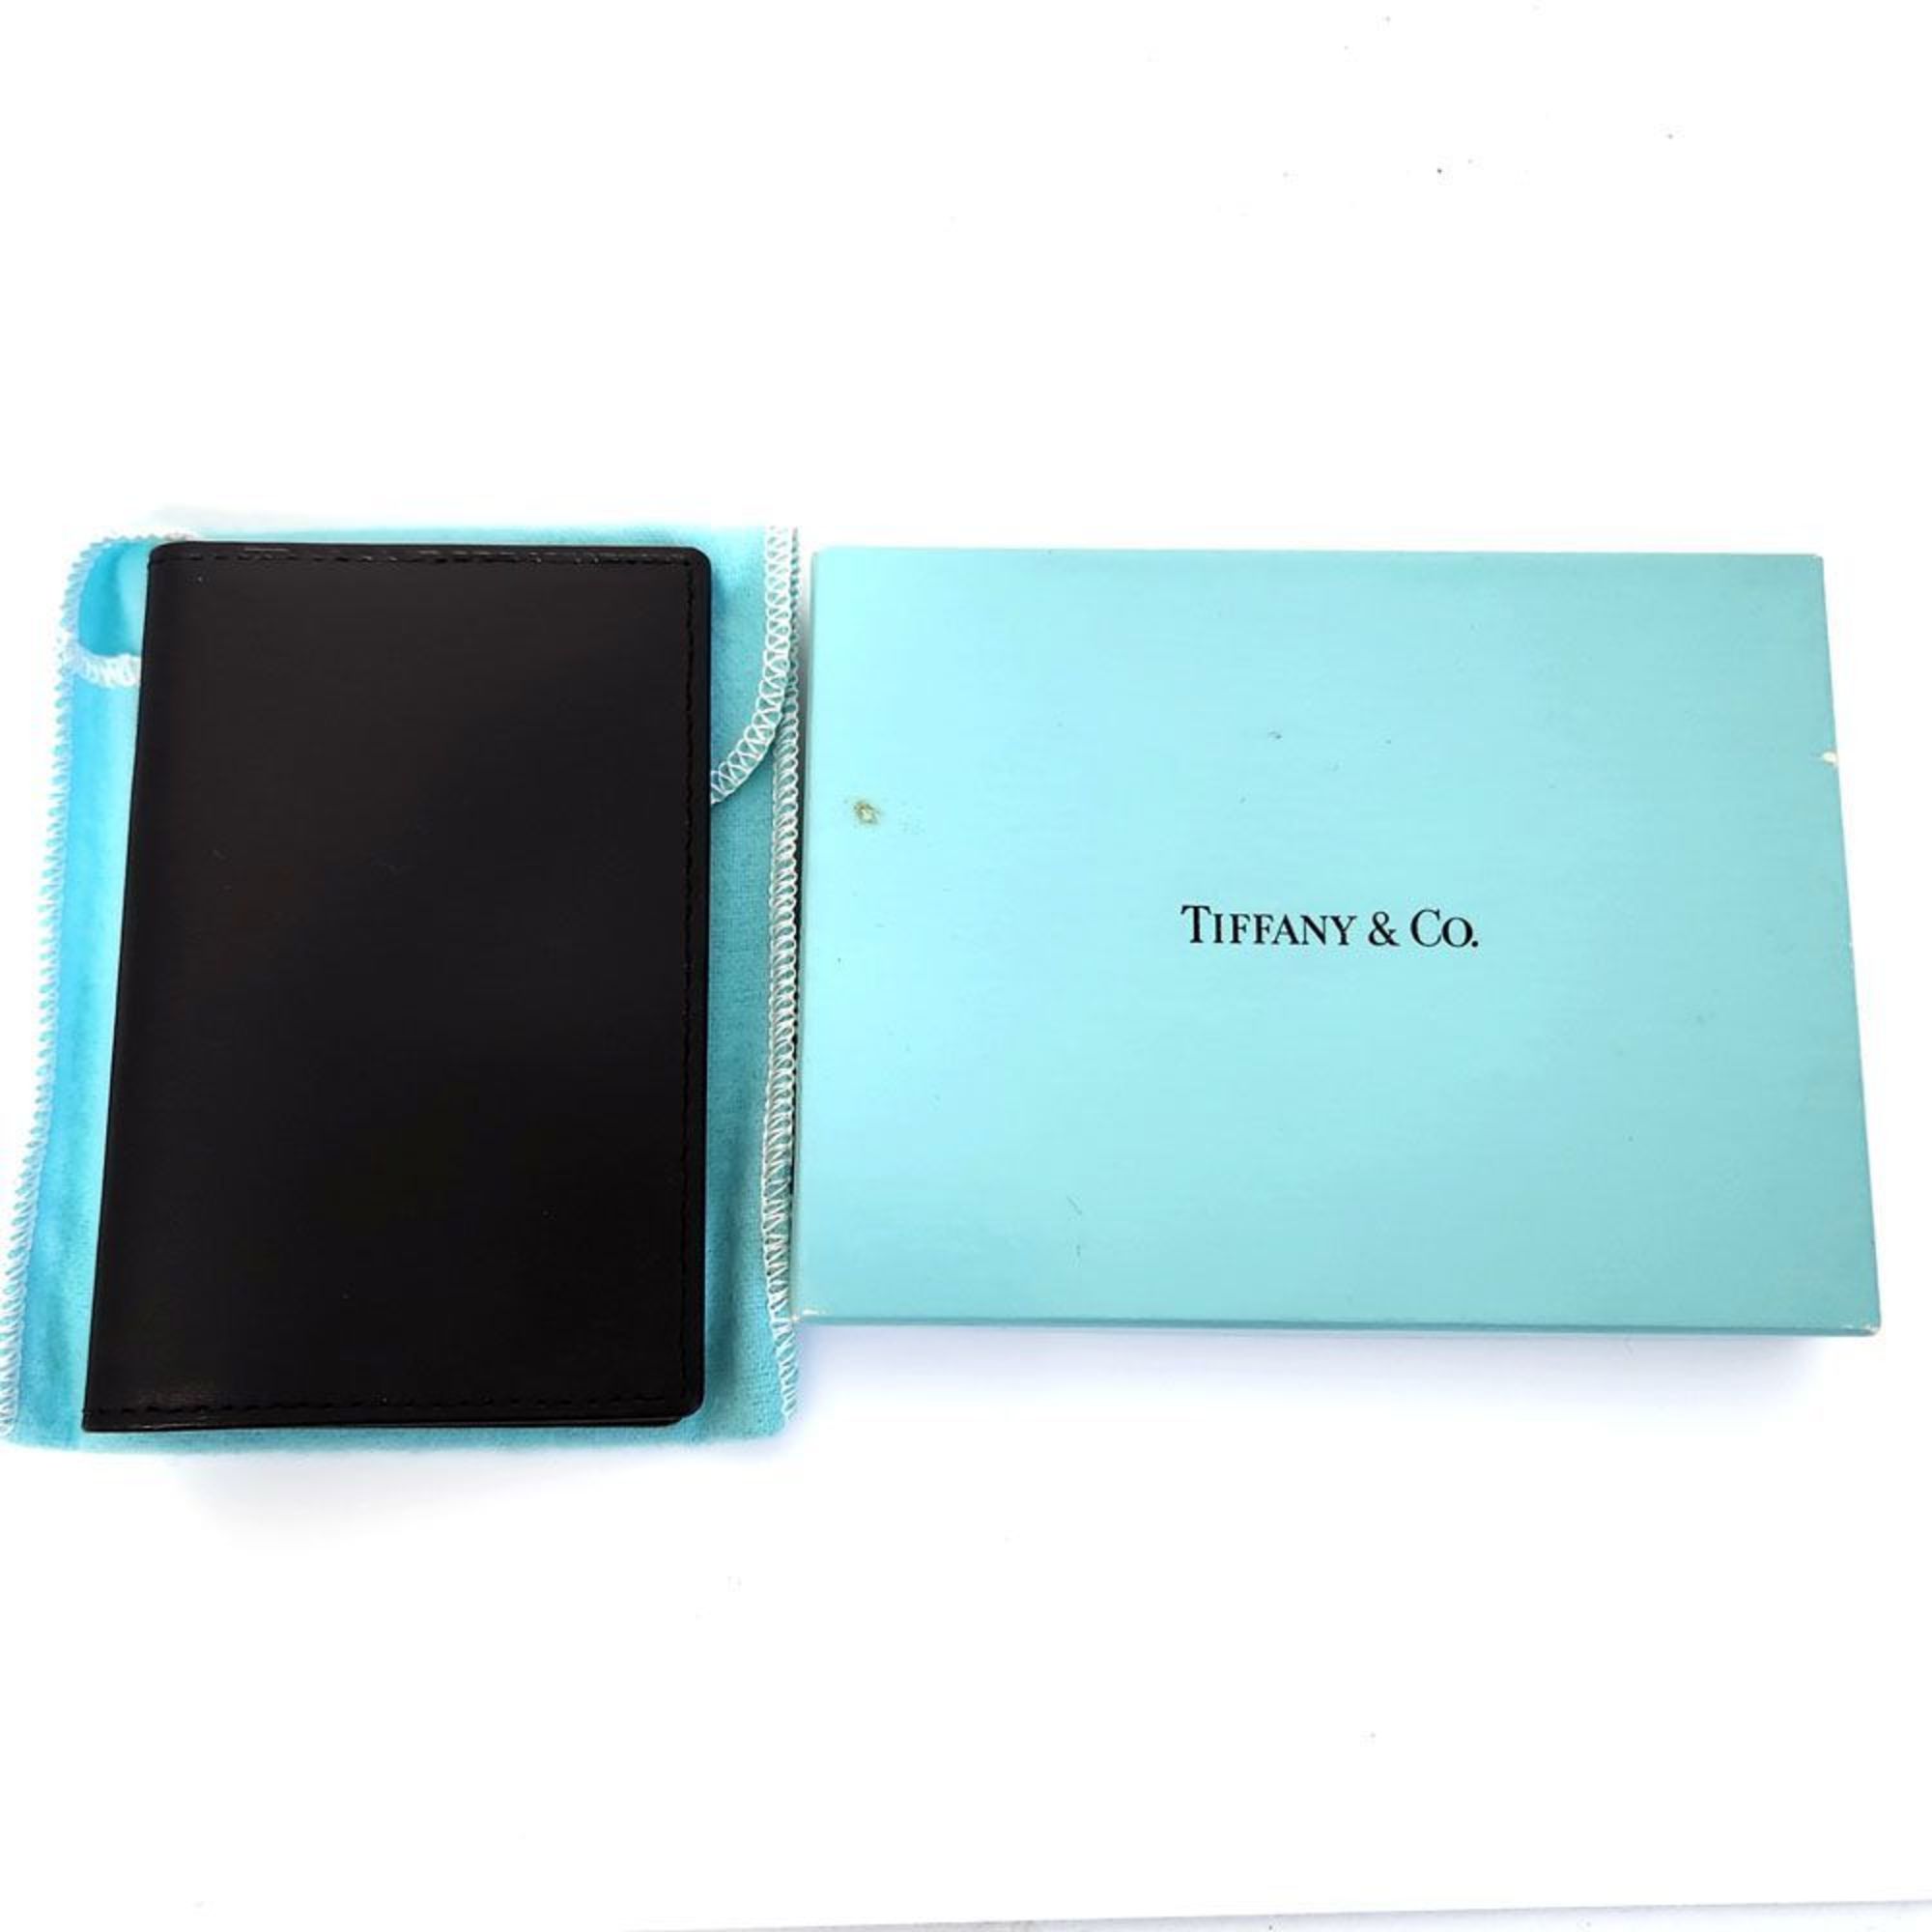 Tiffany TIFFANY Business Card Holder/Card Case Black Leather IC Women's Men's